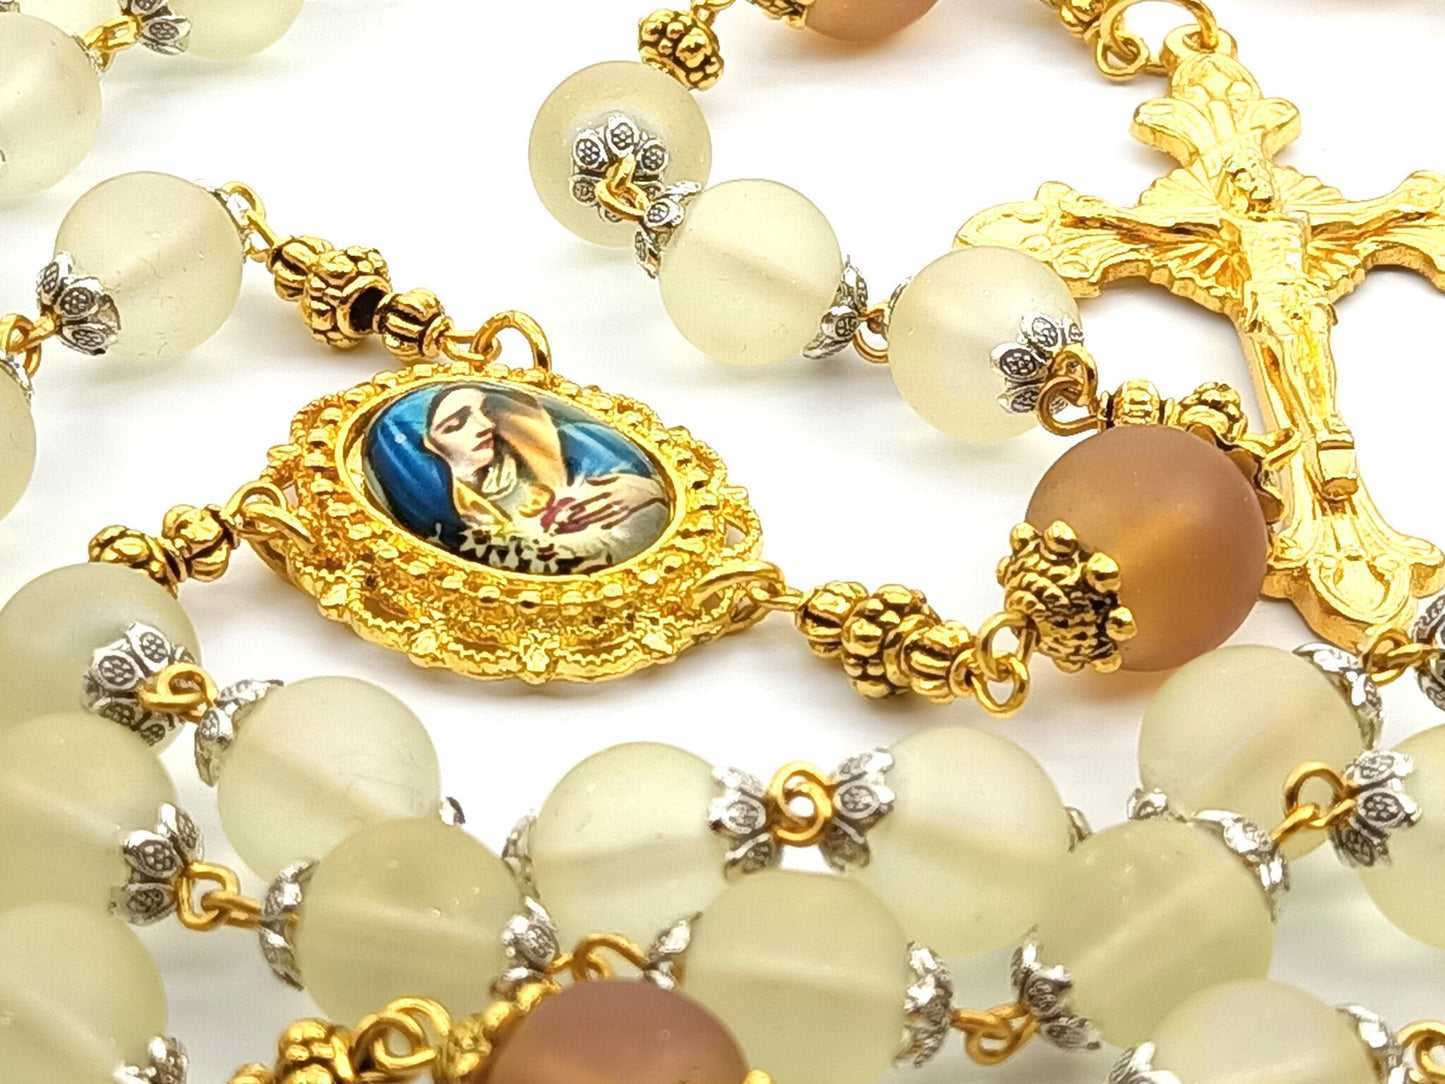 The Immaculate Heart of Mary unique rosary beads with pale frosted glass beads, gold crucifix, picture centre medal and bead caps.